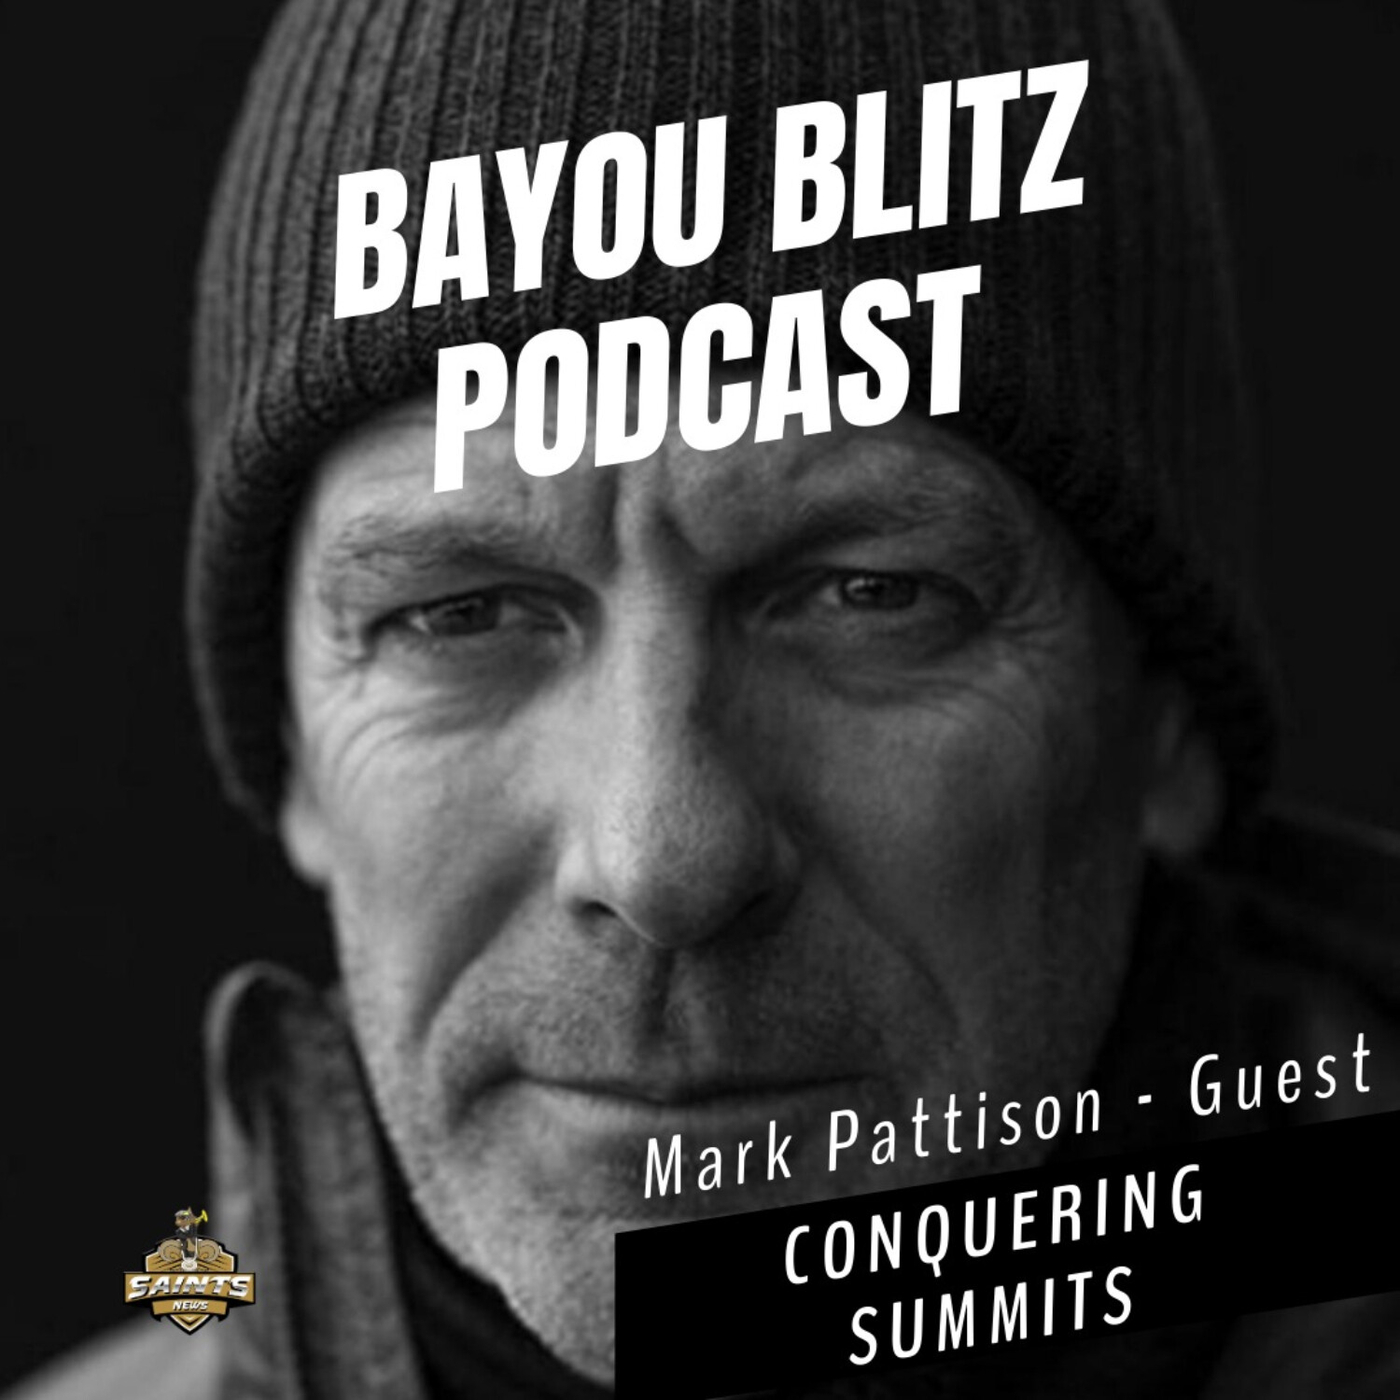 Bayou Blitz Podcast - Conquering Summits with Mark Pattison